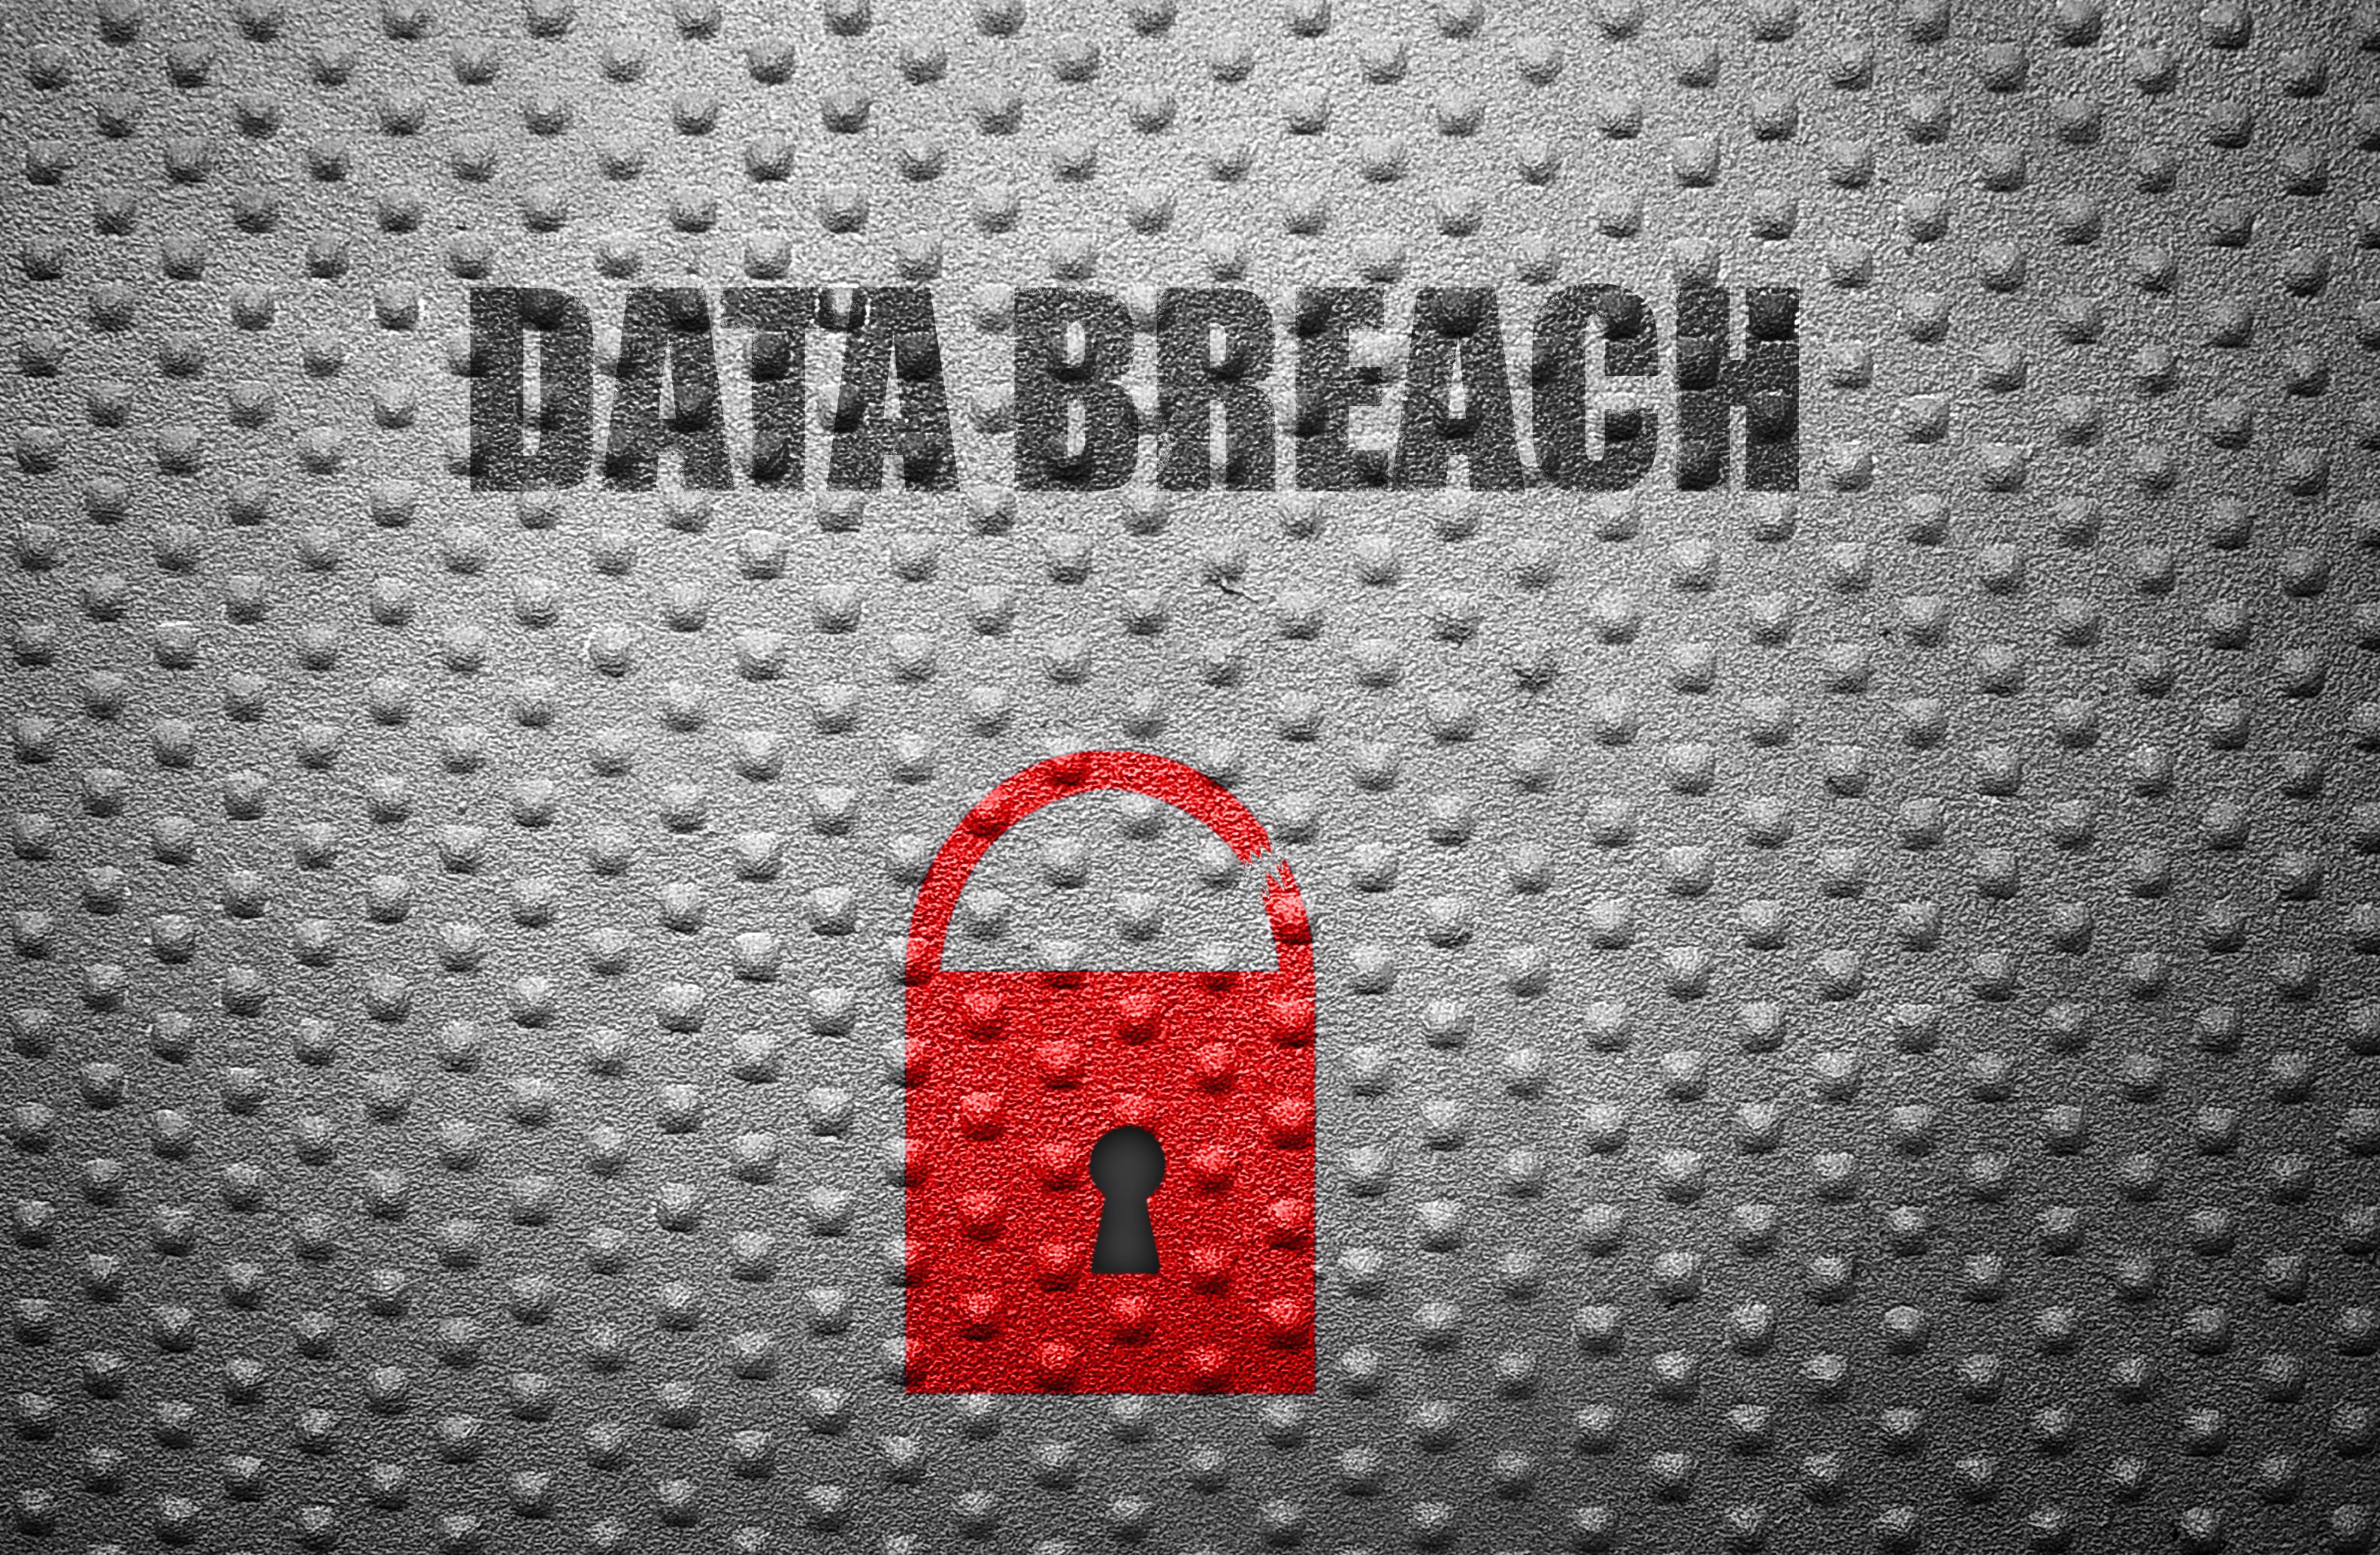 Average cost of a data breach in Middle East stands at $4.94 million